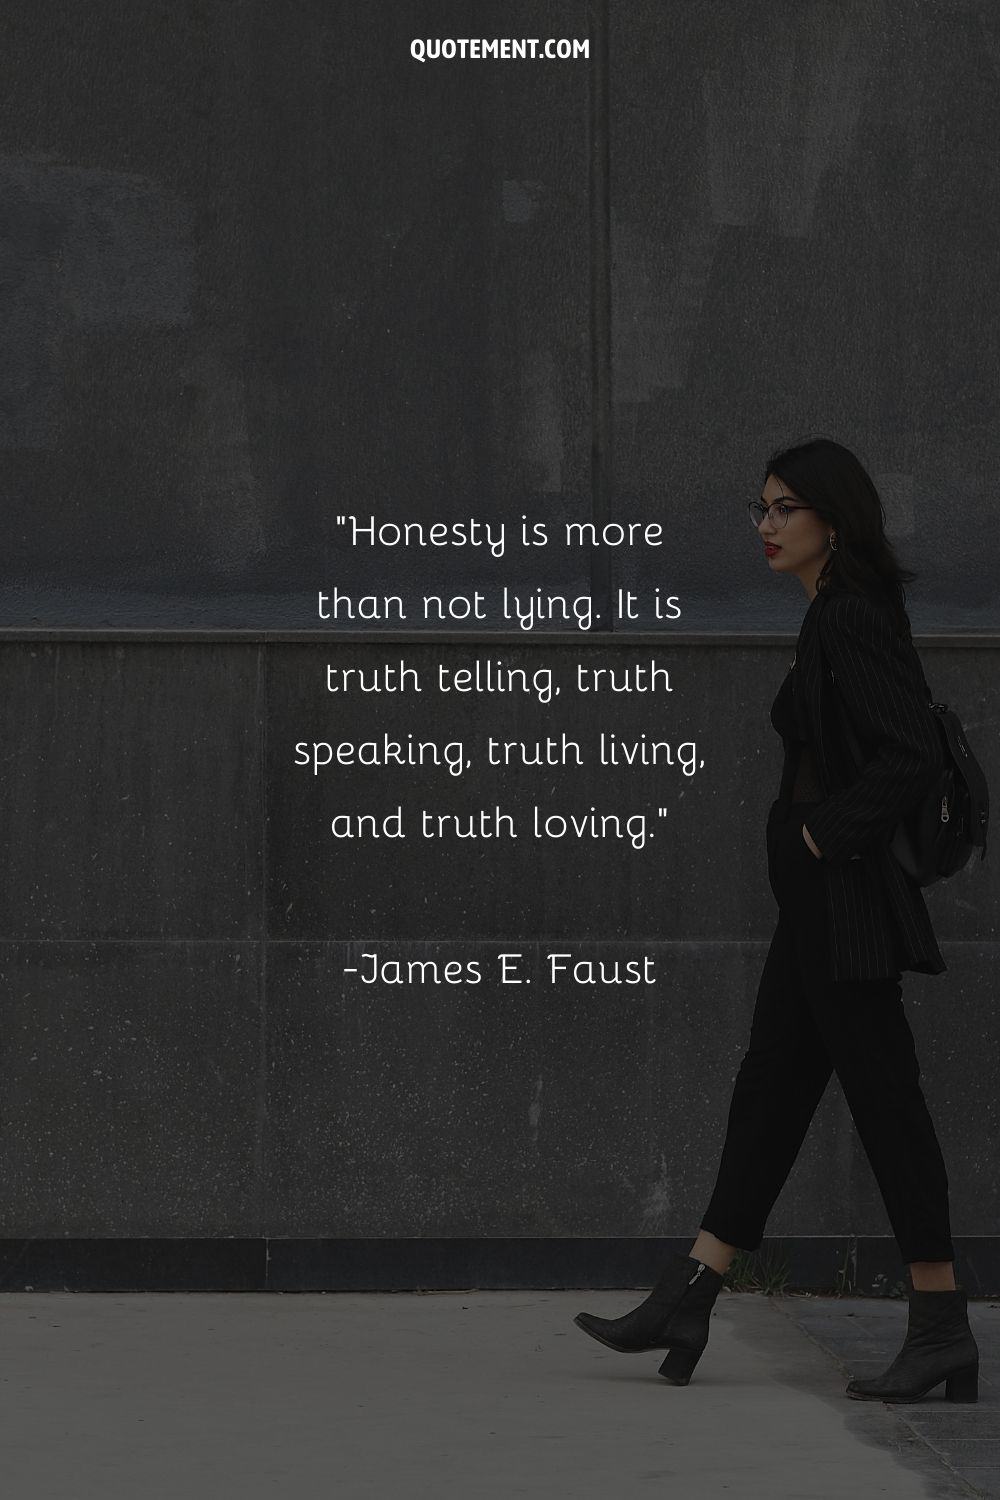 Honesty is more than not lying. It is truth telling, truth speaking, truth living, and truth loving